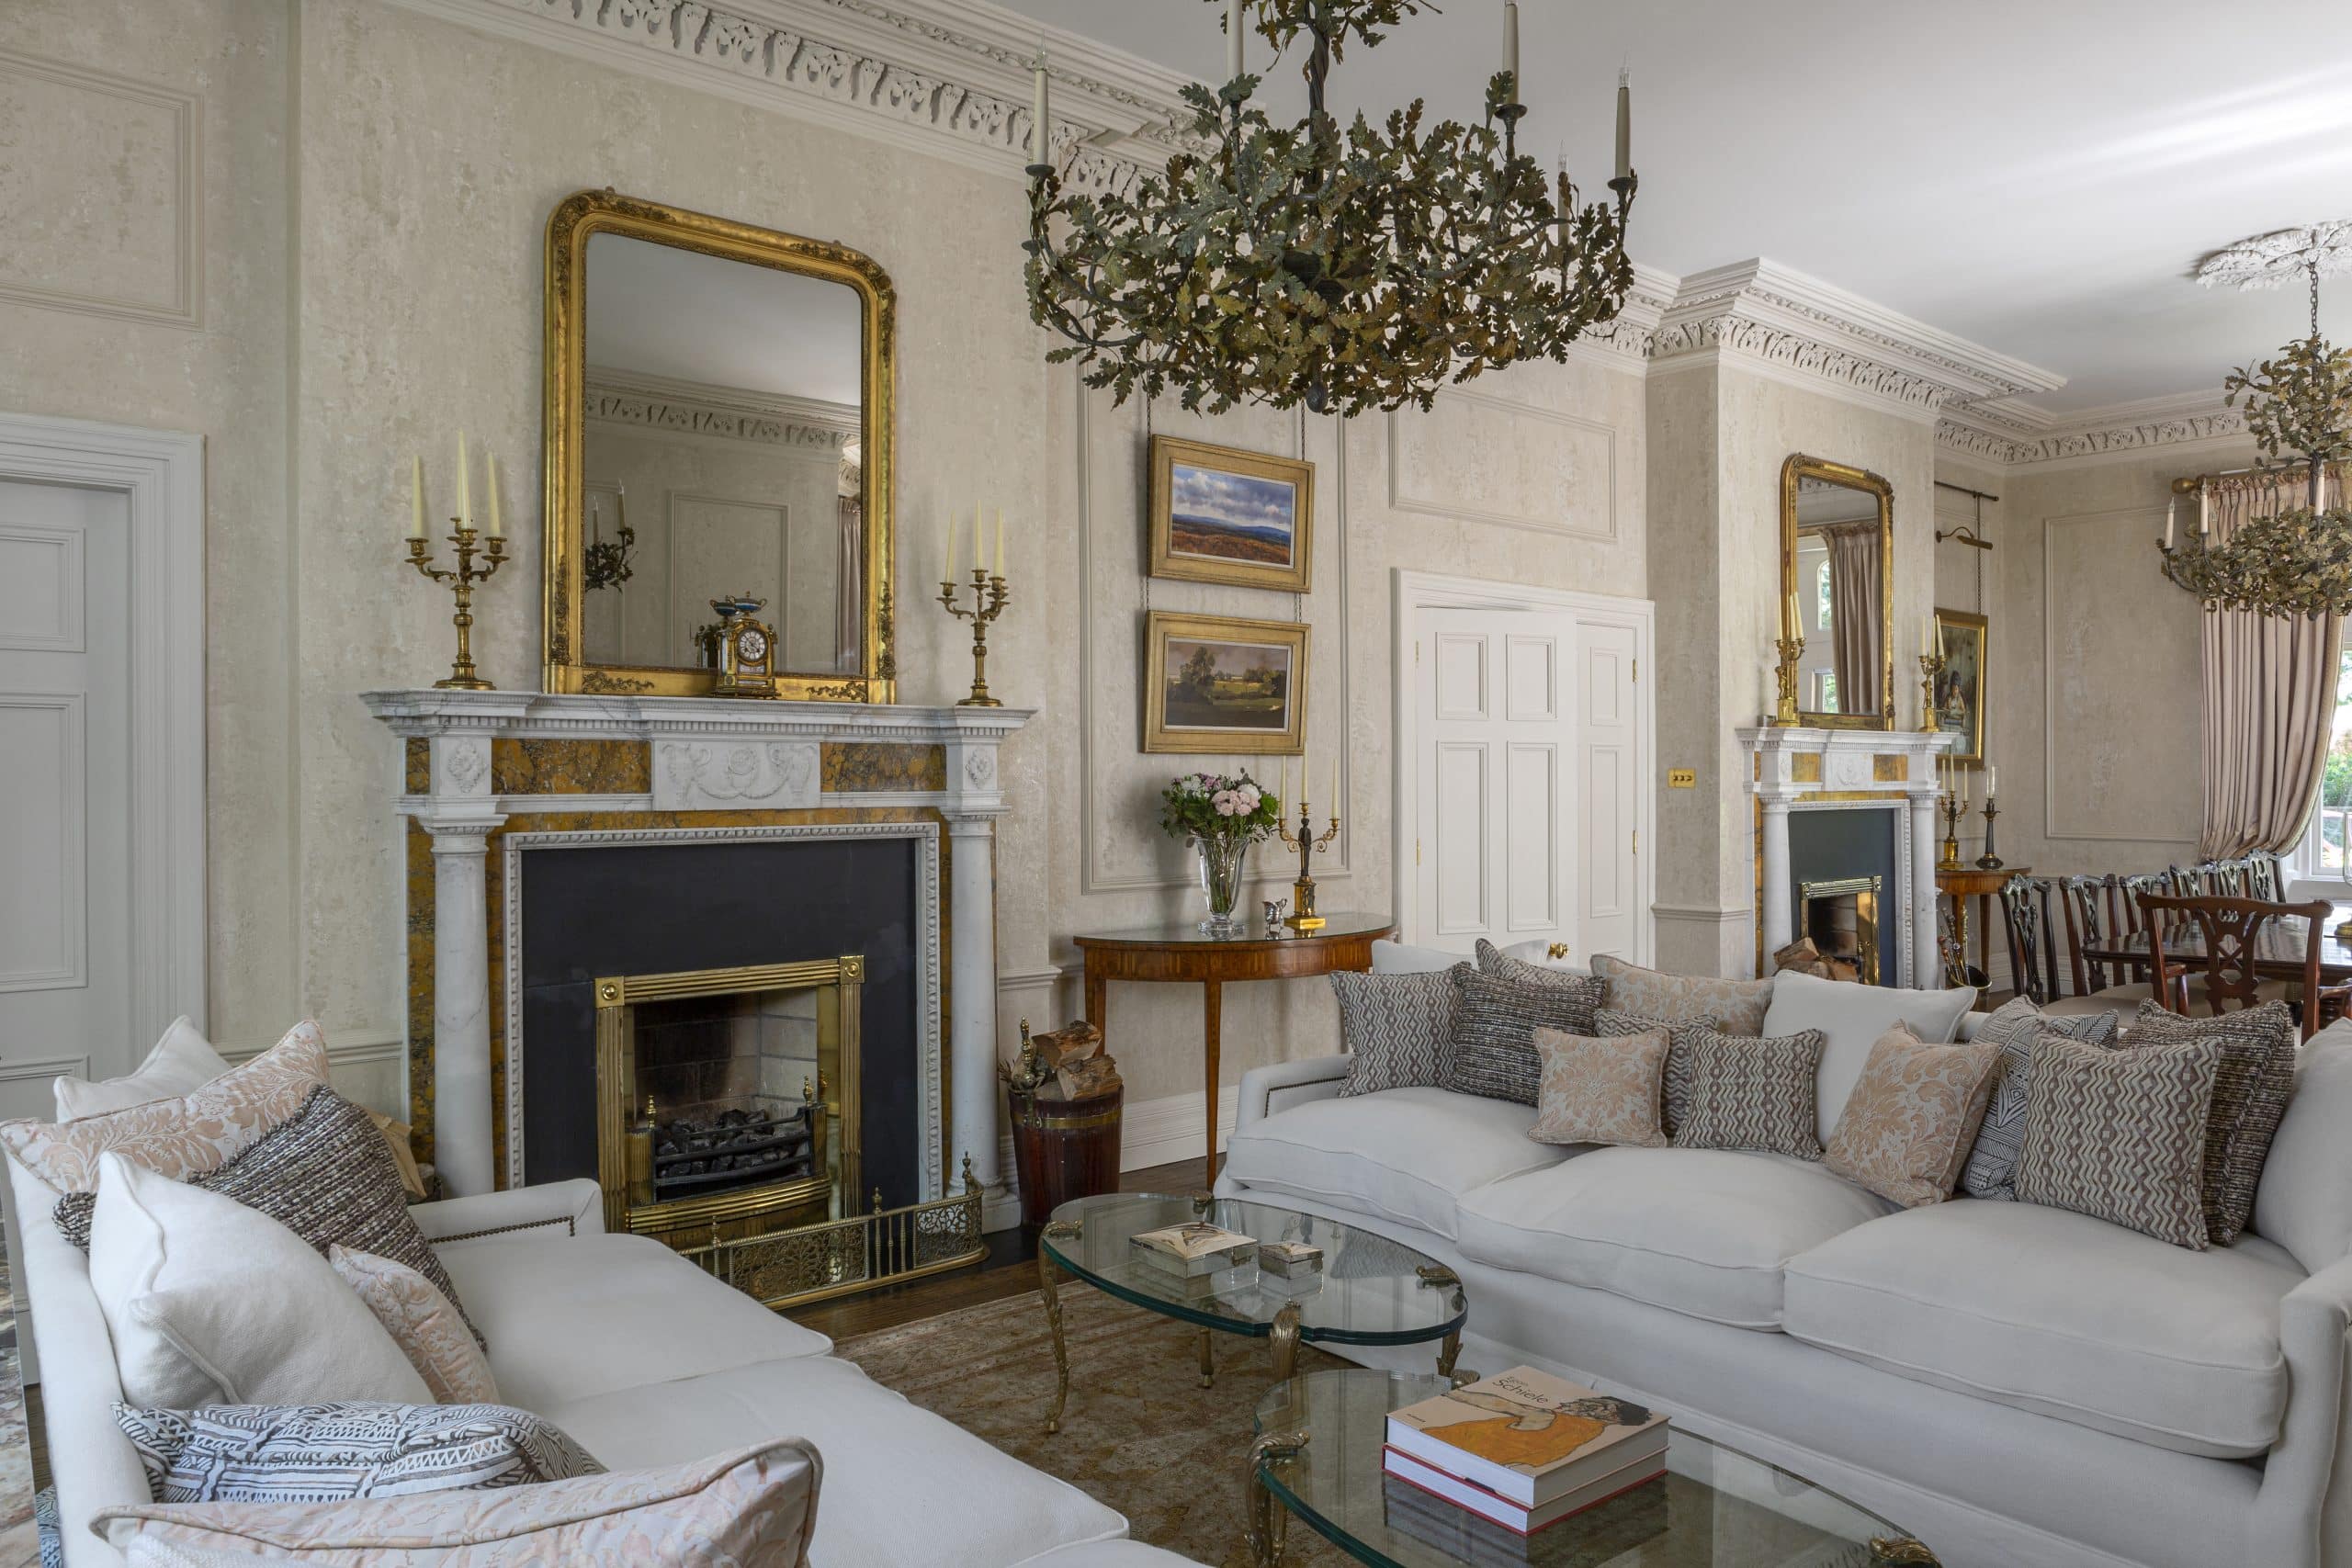 Living and dining great room of Victorian house in Dublin designed by Bryan O'Sullivan with marble fireplaces from Ryan & Smith, Maison Jansen glass oval coffee tables, leaf chandeliers